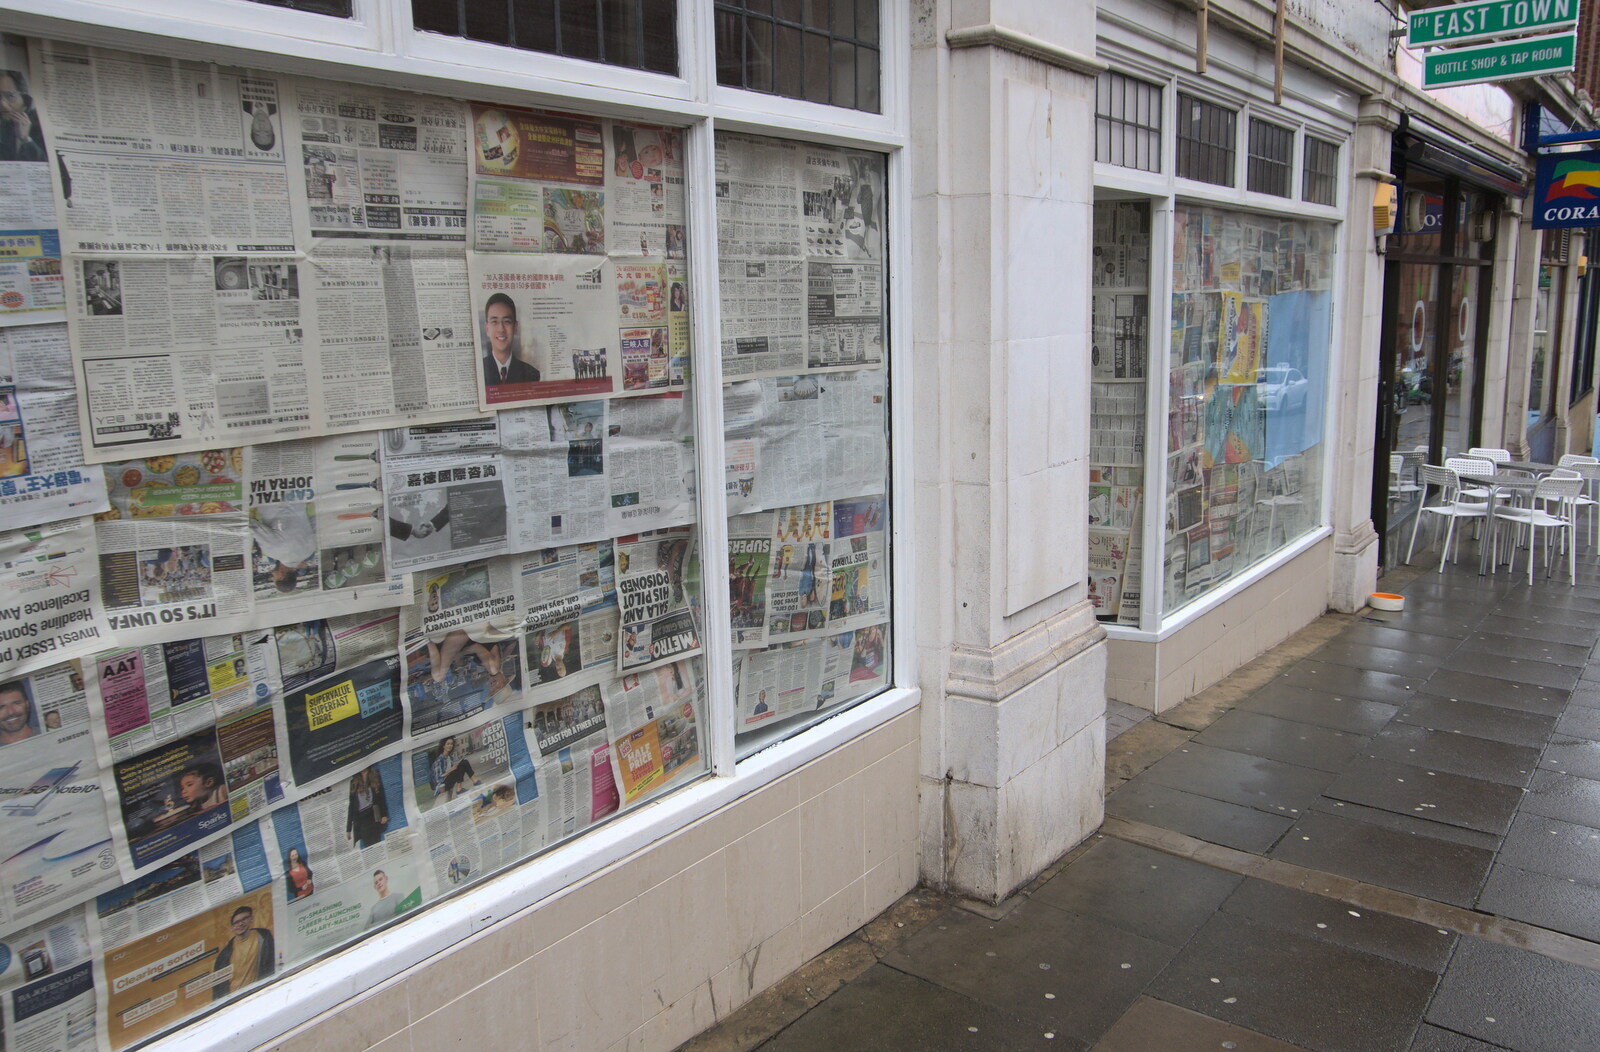 Newspapered-up shop from Fred's Flute Exam, Ipswich, Suffolk - 5th March 2020